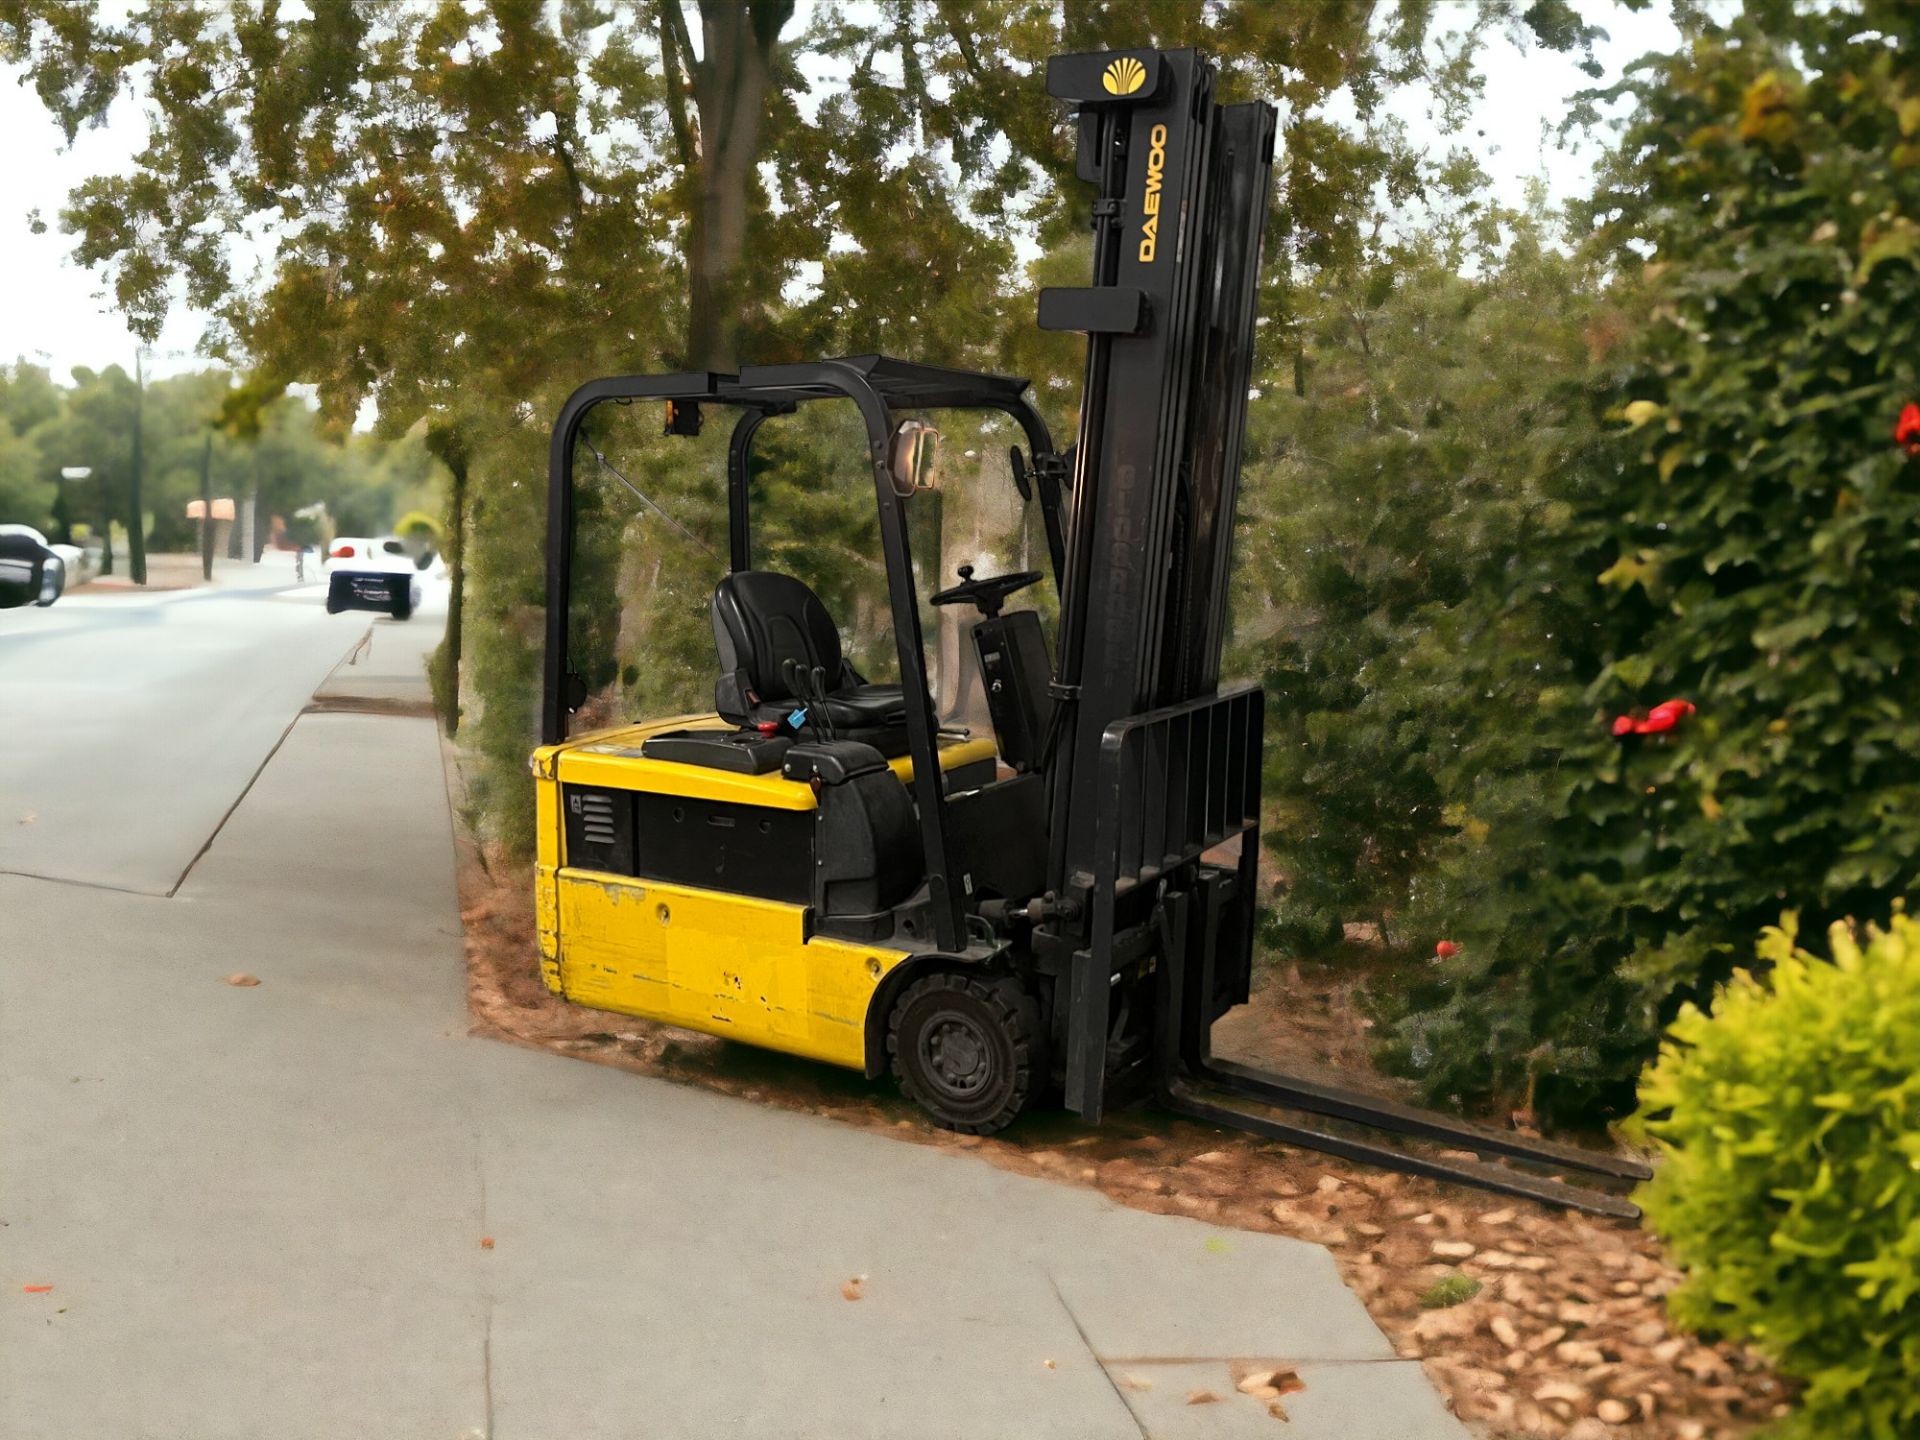 DAEWOO ELECTRIC 3-WHEEL FORKLIFT - MODEL B18T-2 (2002) **(INCLUDES CHARGER)** - Image 5 of 6